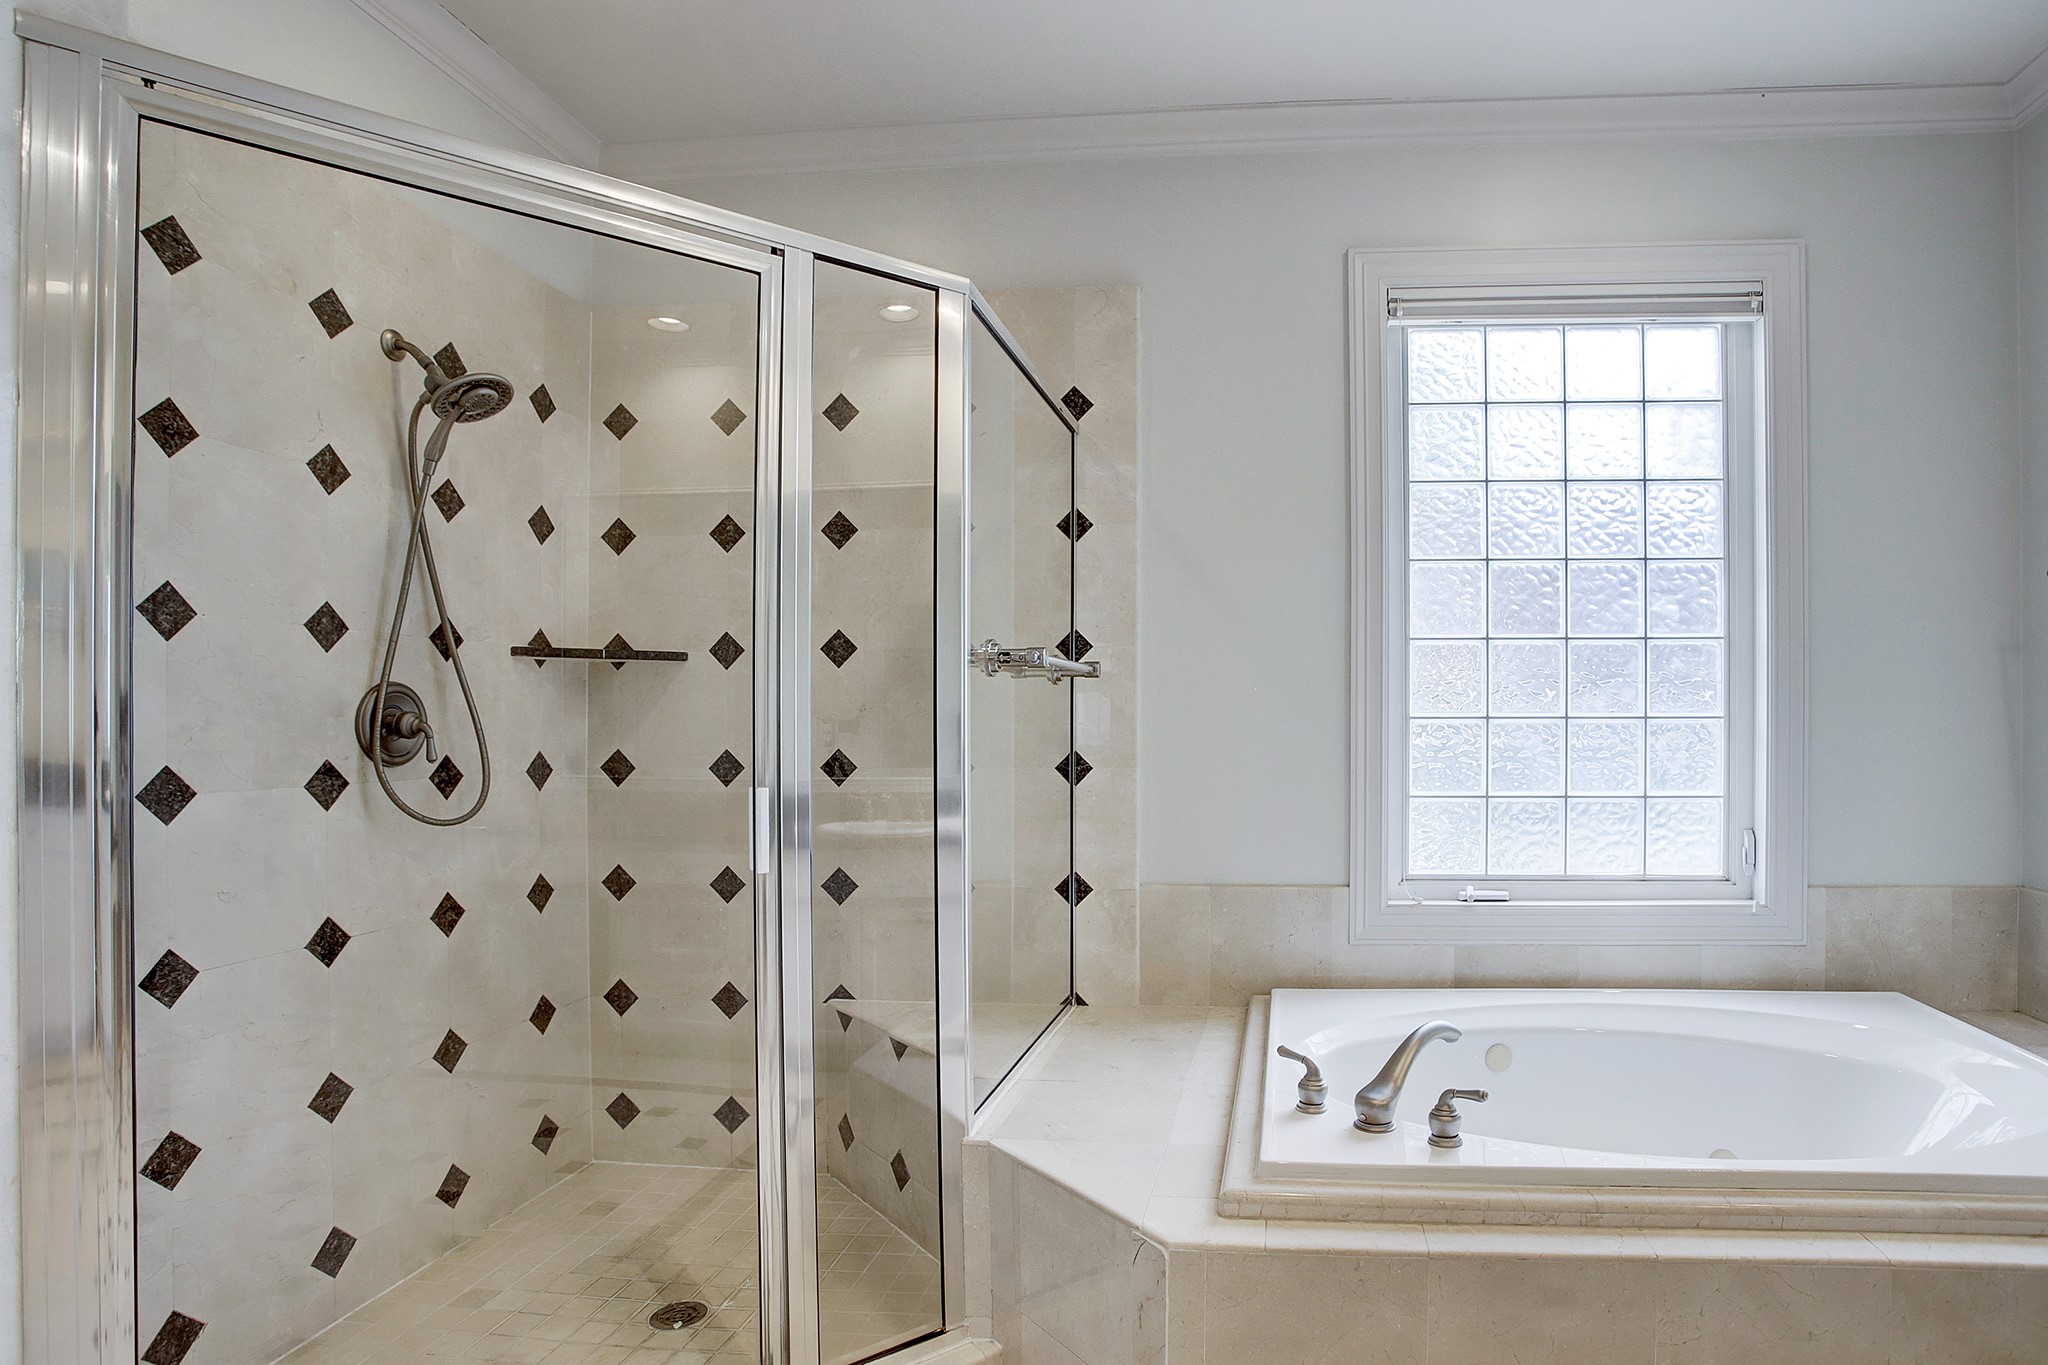 PRIMARY BATH - Light-filled primary bath features a jetted tub and separate shower.